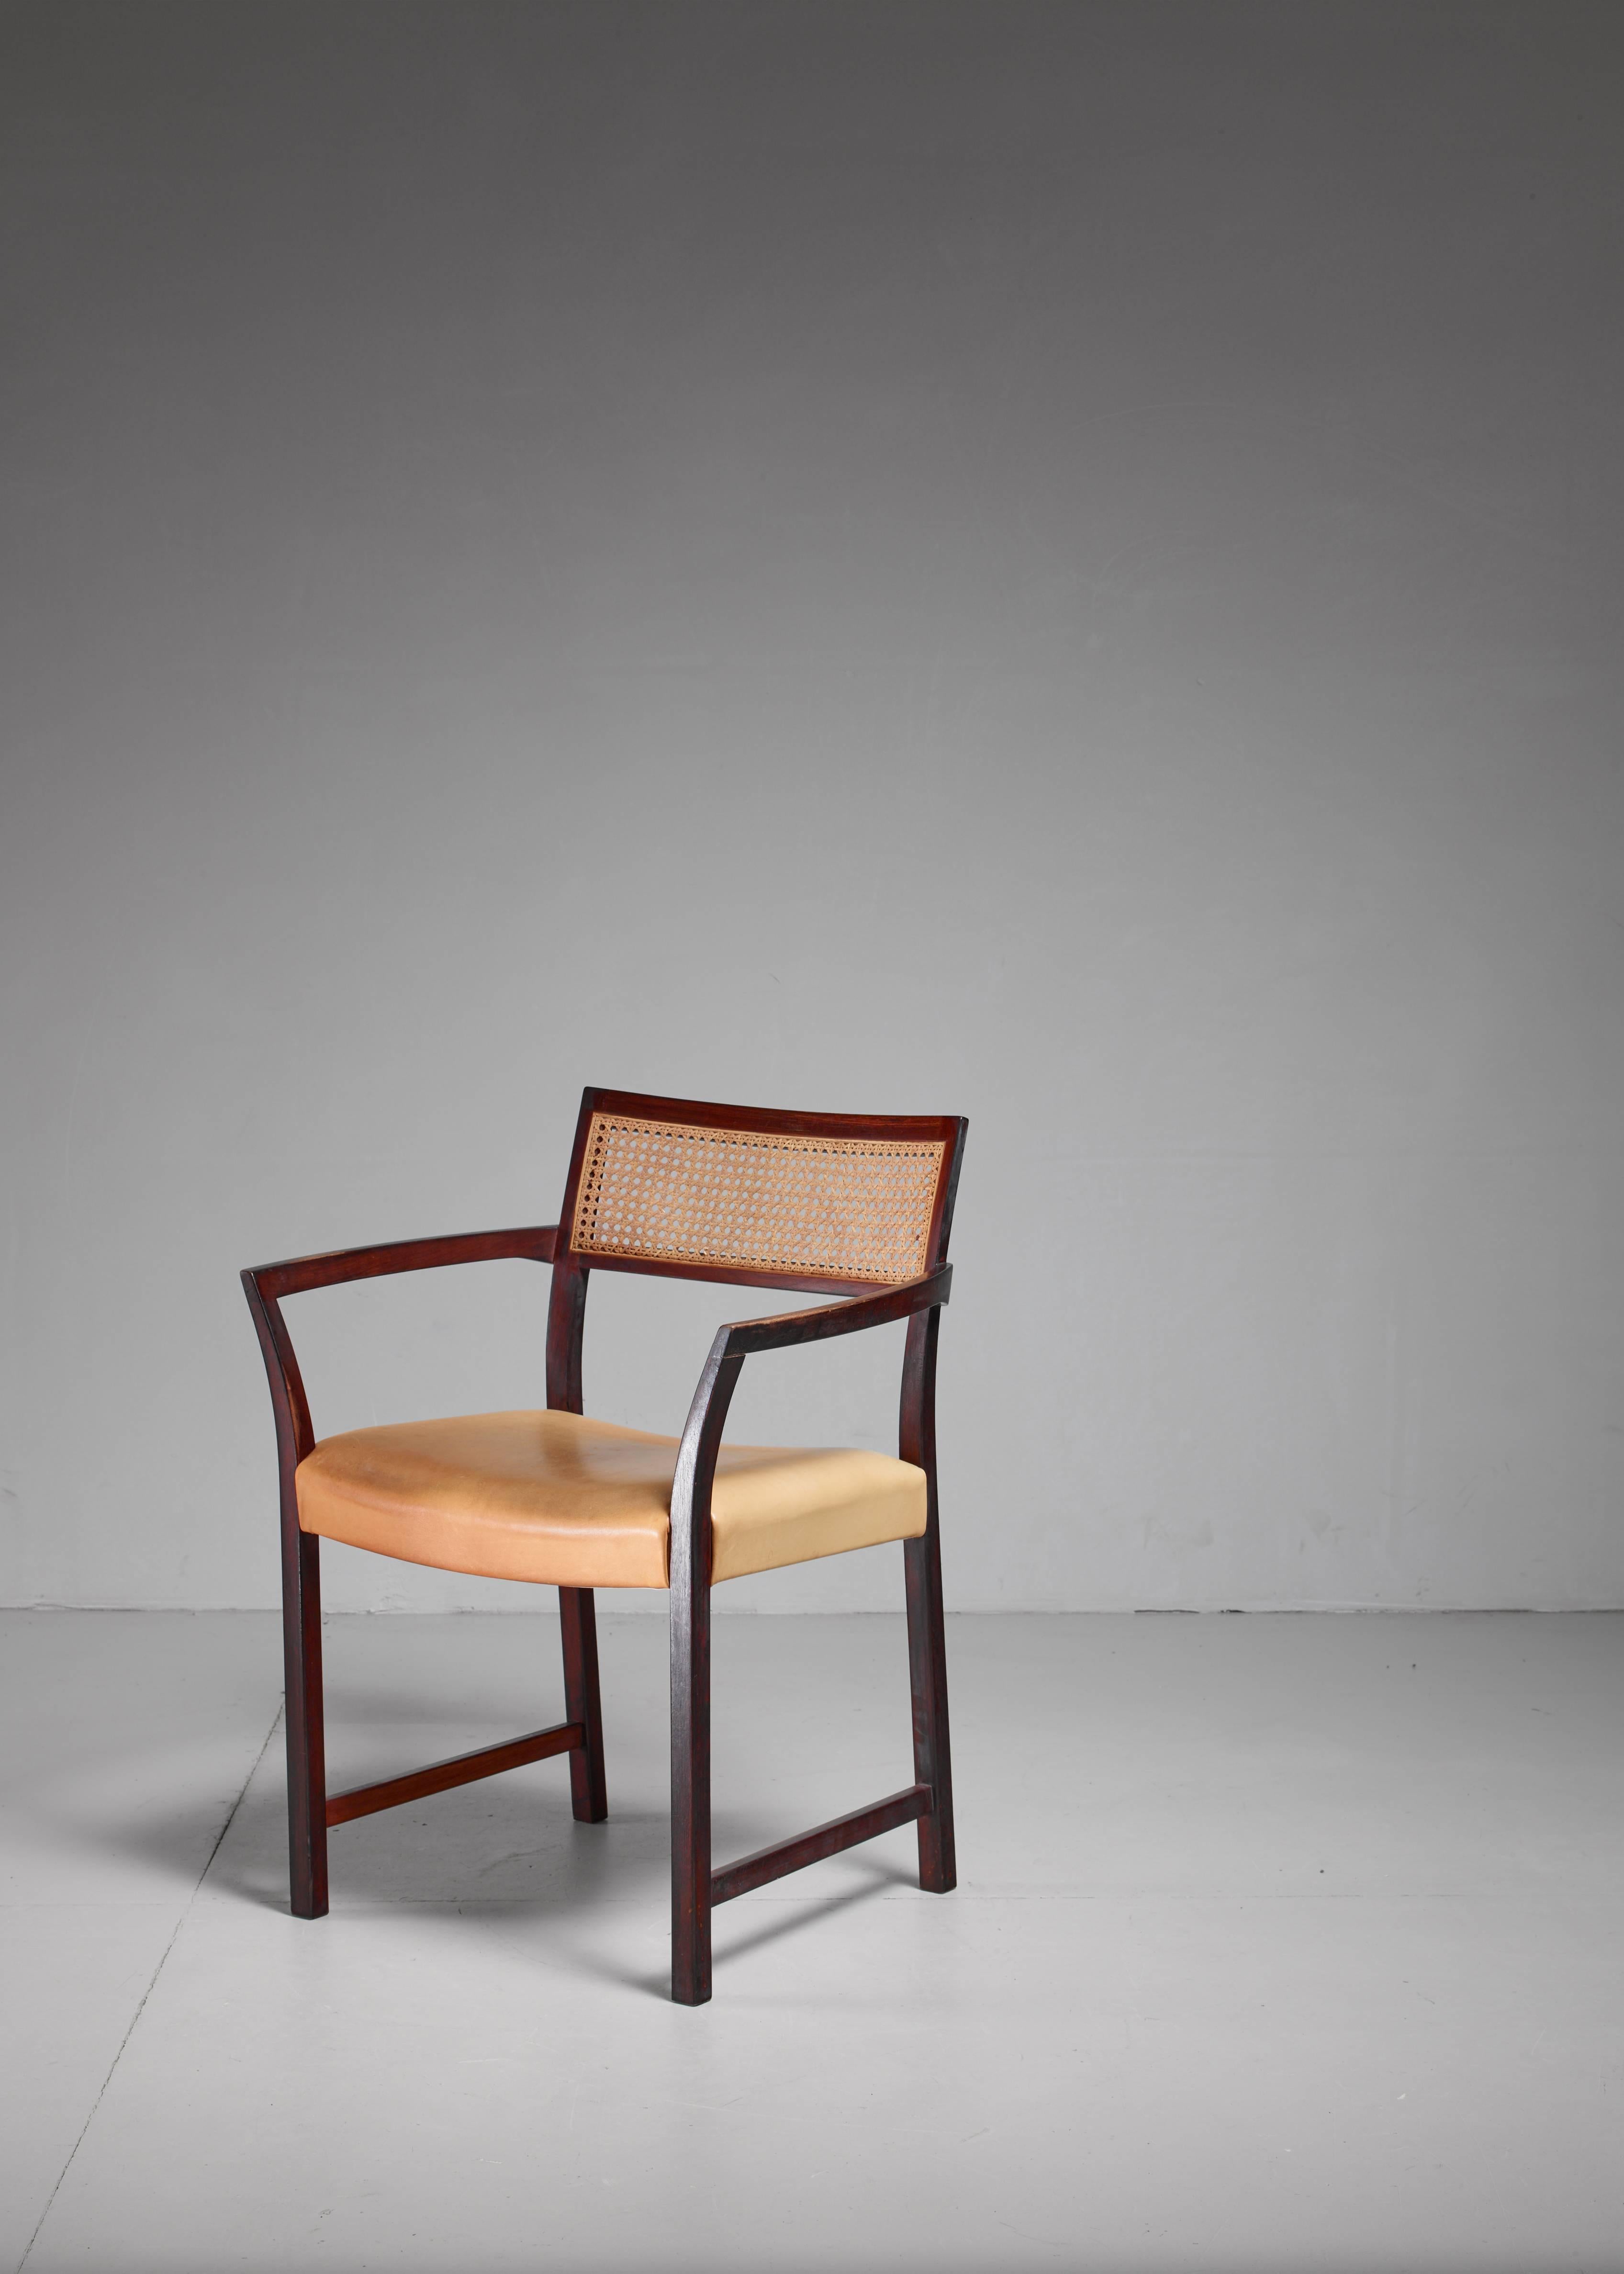 An armchair by Illum Wikkelsø, made of a mahogany frame with a cream colored leather seat and a woven cane backrest. The thin and curving out armrests are a beautiful detail. This chair was a prototype and meant to be part of Wikkelsø's 'Plexus'